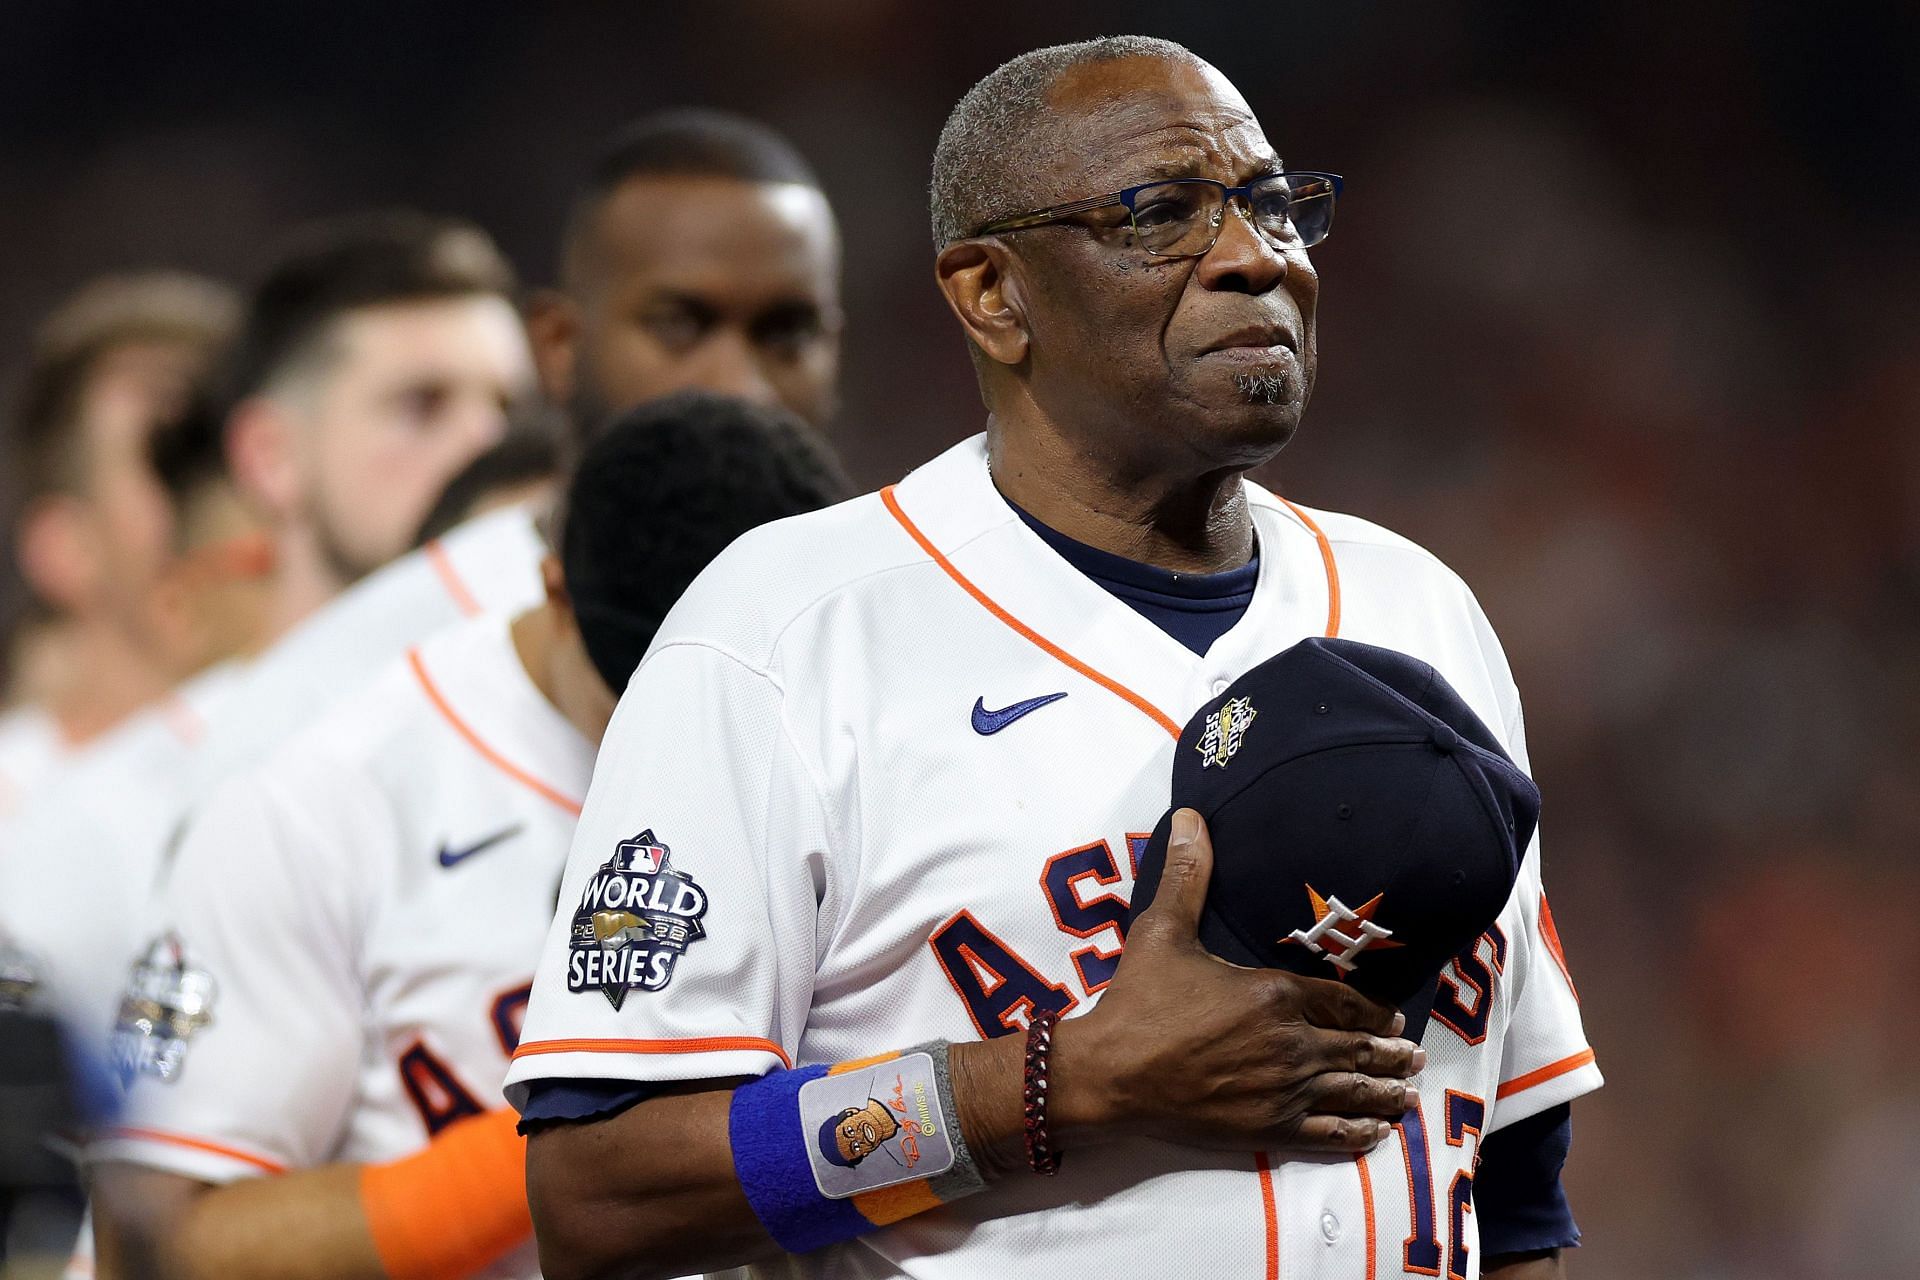 Tribute to Hank Aaron a touching moment for Dusty Baker